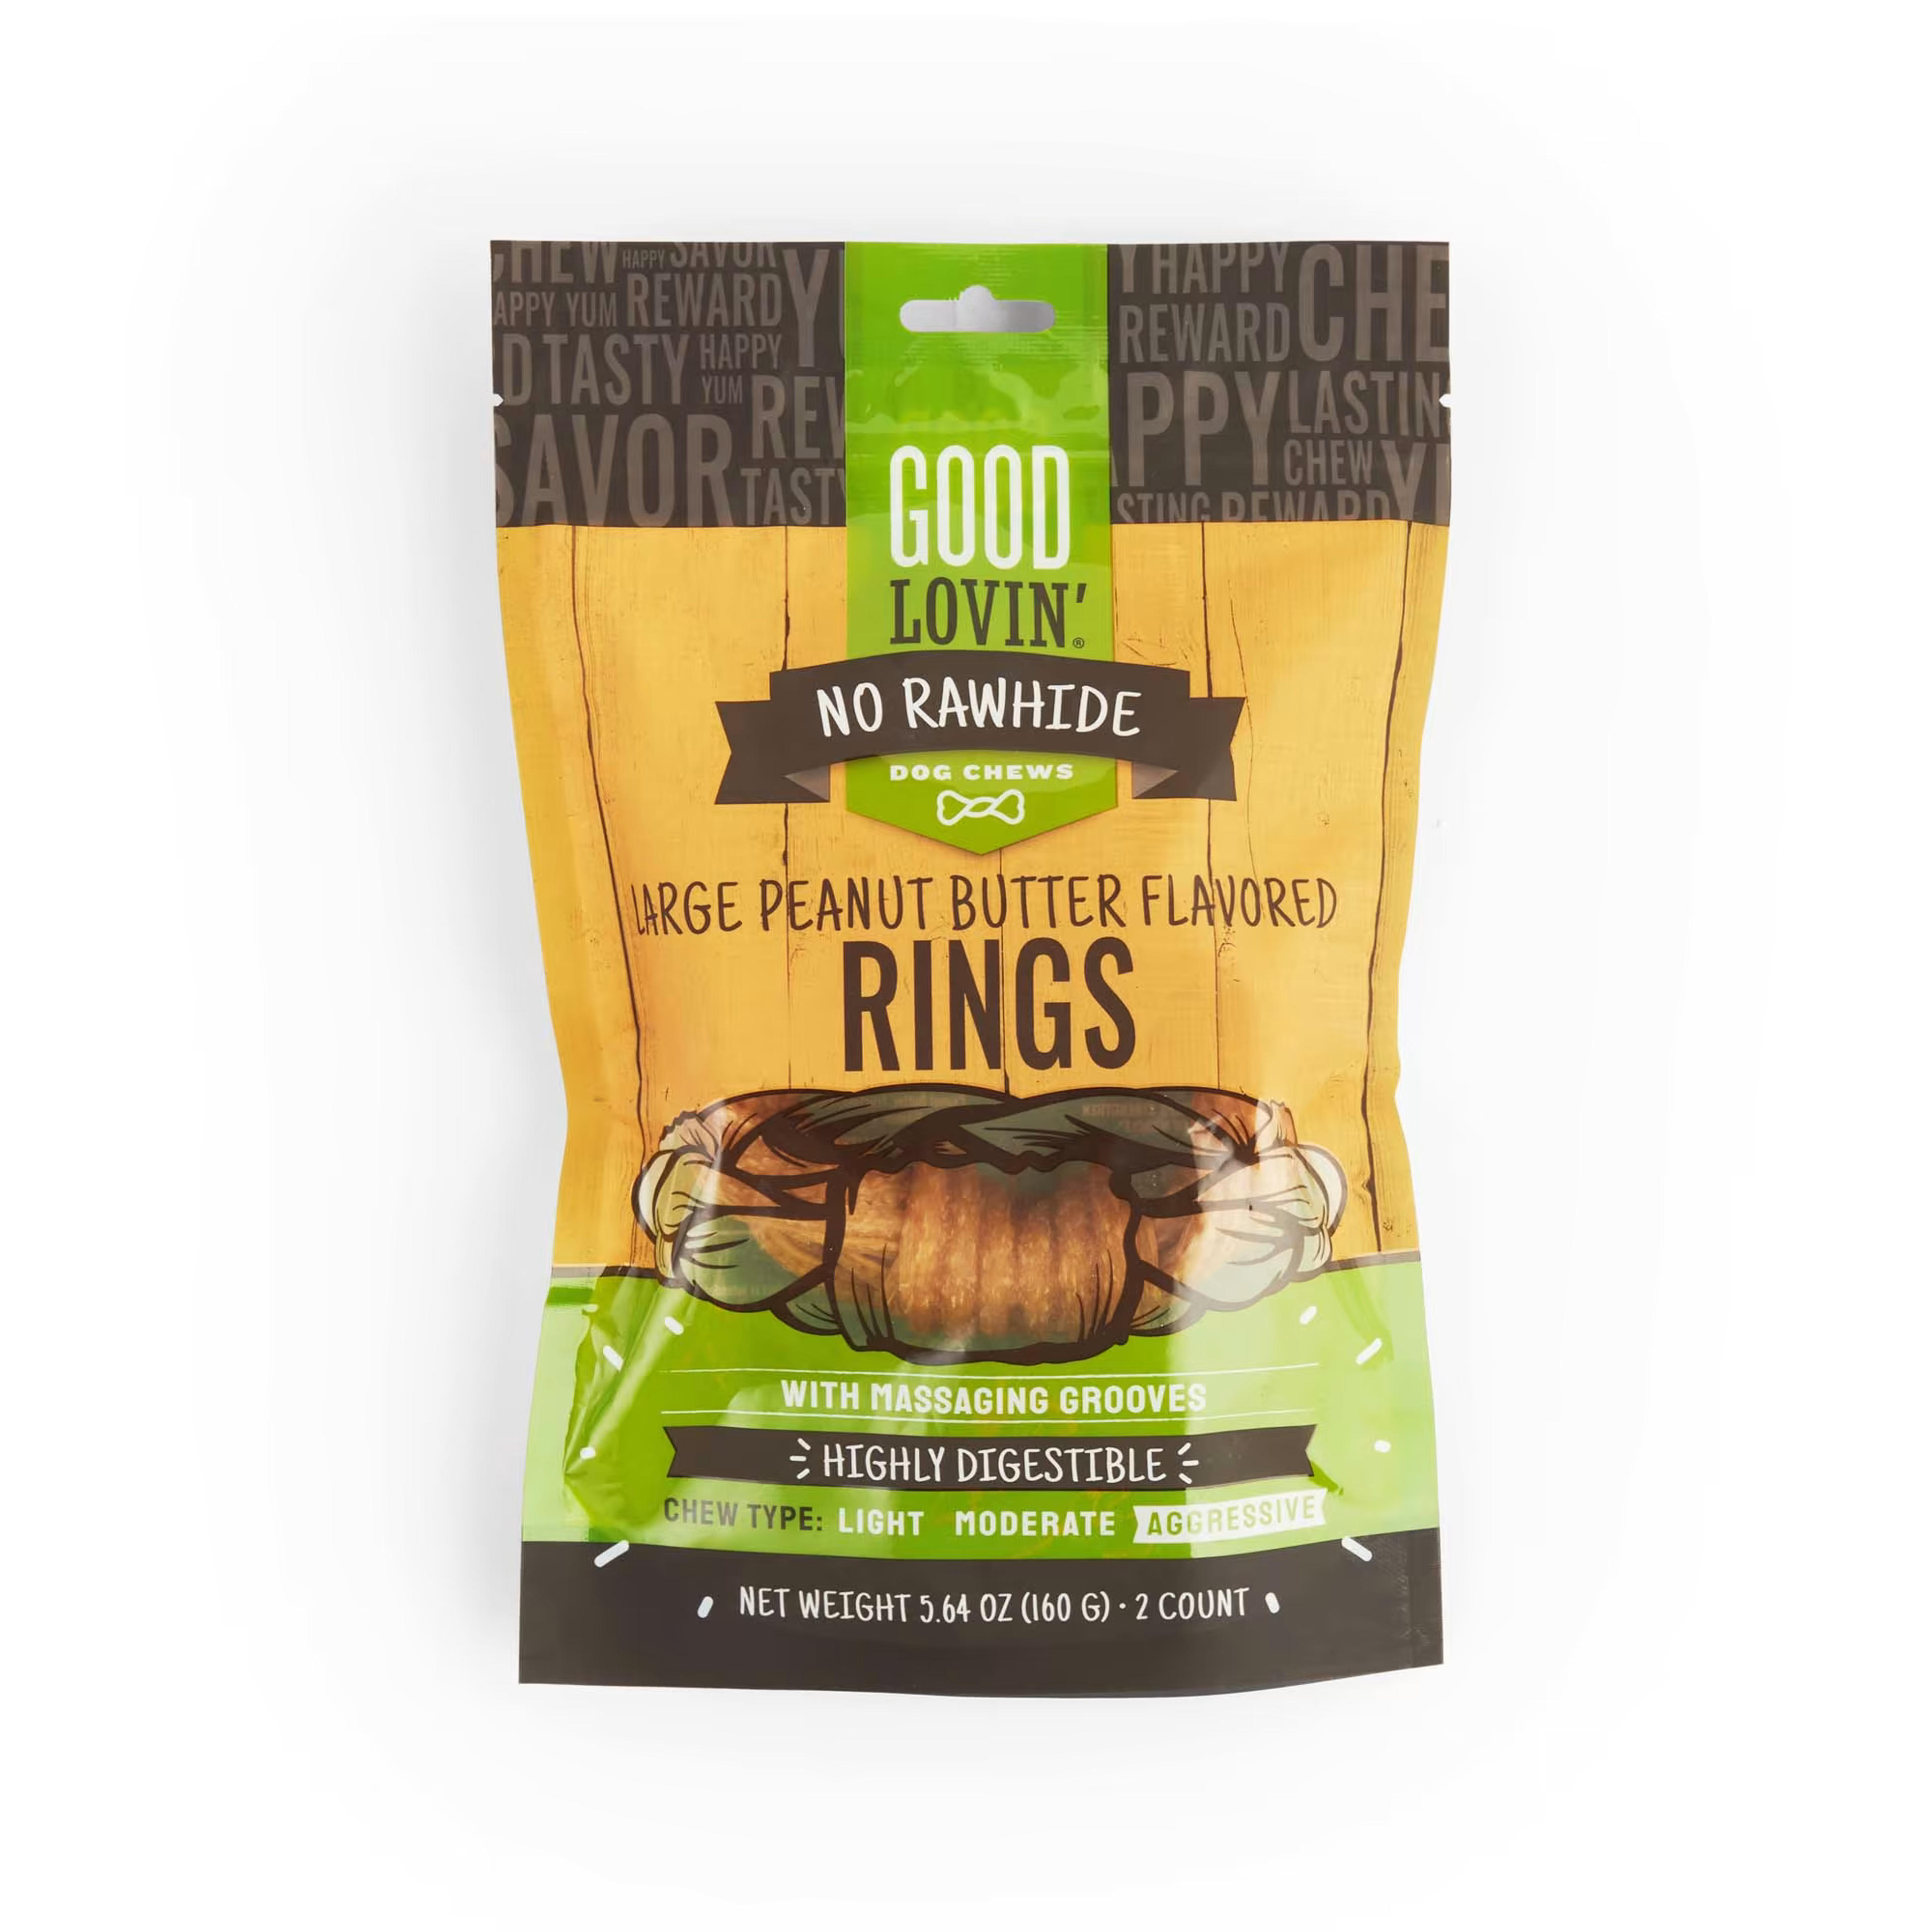 Good Lovin' No Rawhide Large Peanut Butter-Flavored Rings Dog Treats, 5.64 oz., Count of 2